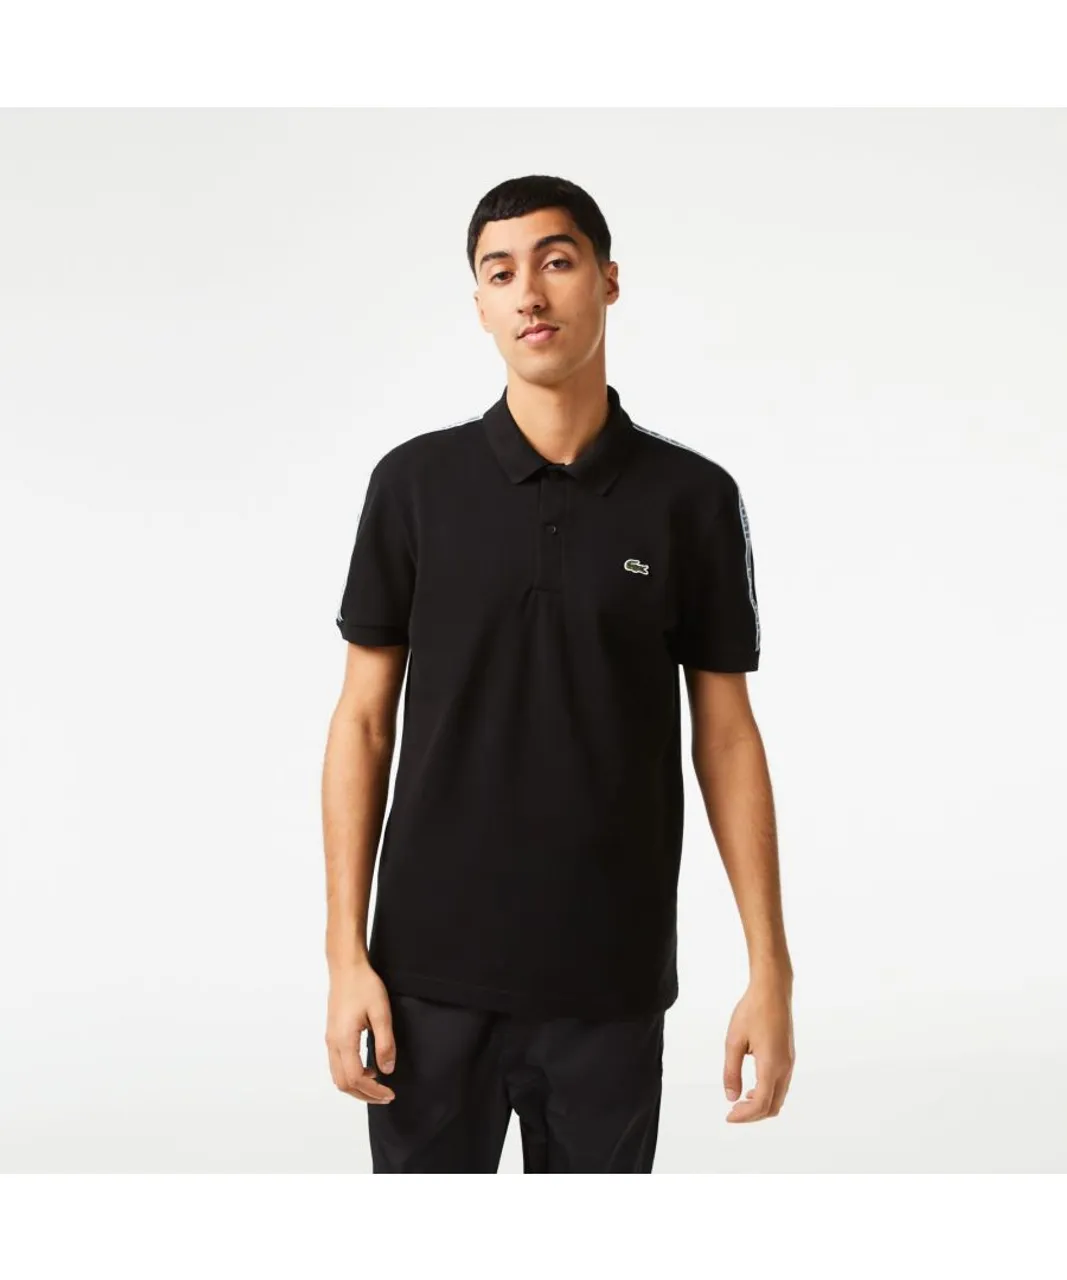 Lacoste Mens Short Sleeve Tape Pique Polo Shirt in Black Cotton